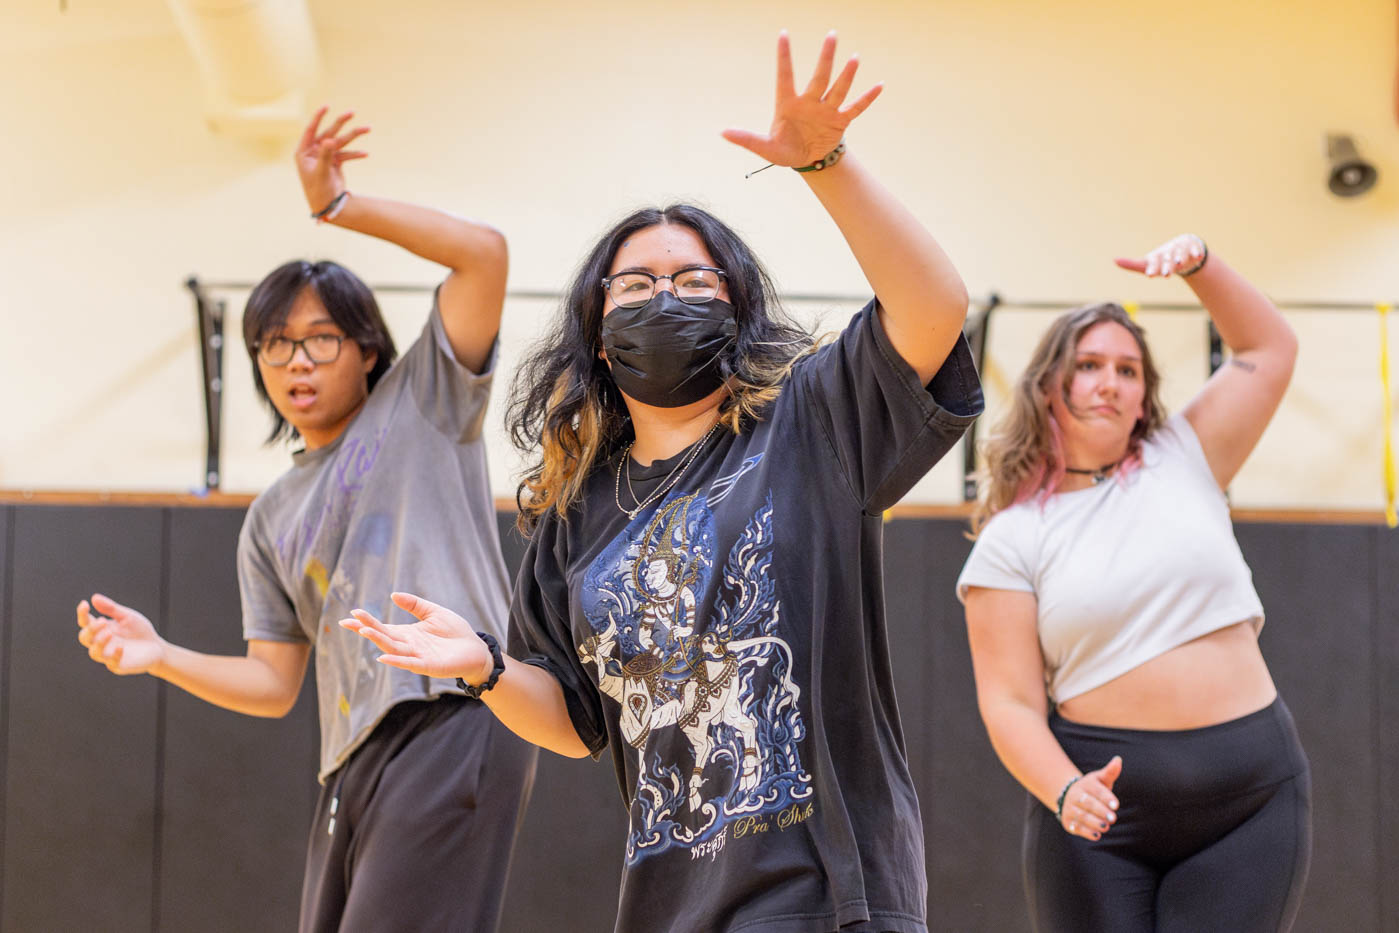 Anthony Le, Diane Intha, and Ella Malicoat dance to their routine of Red Moon on Oct. 25. KVersity, the dance group, hosts practices at Heskett and offers workshops to new dancers.